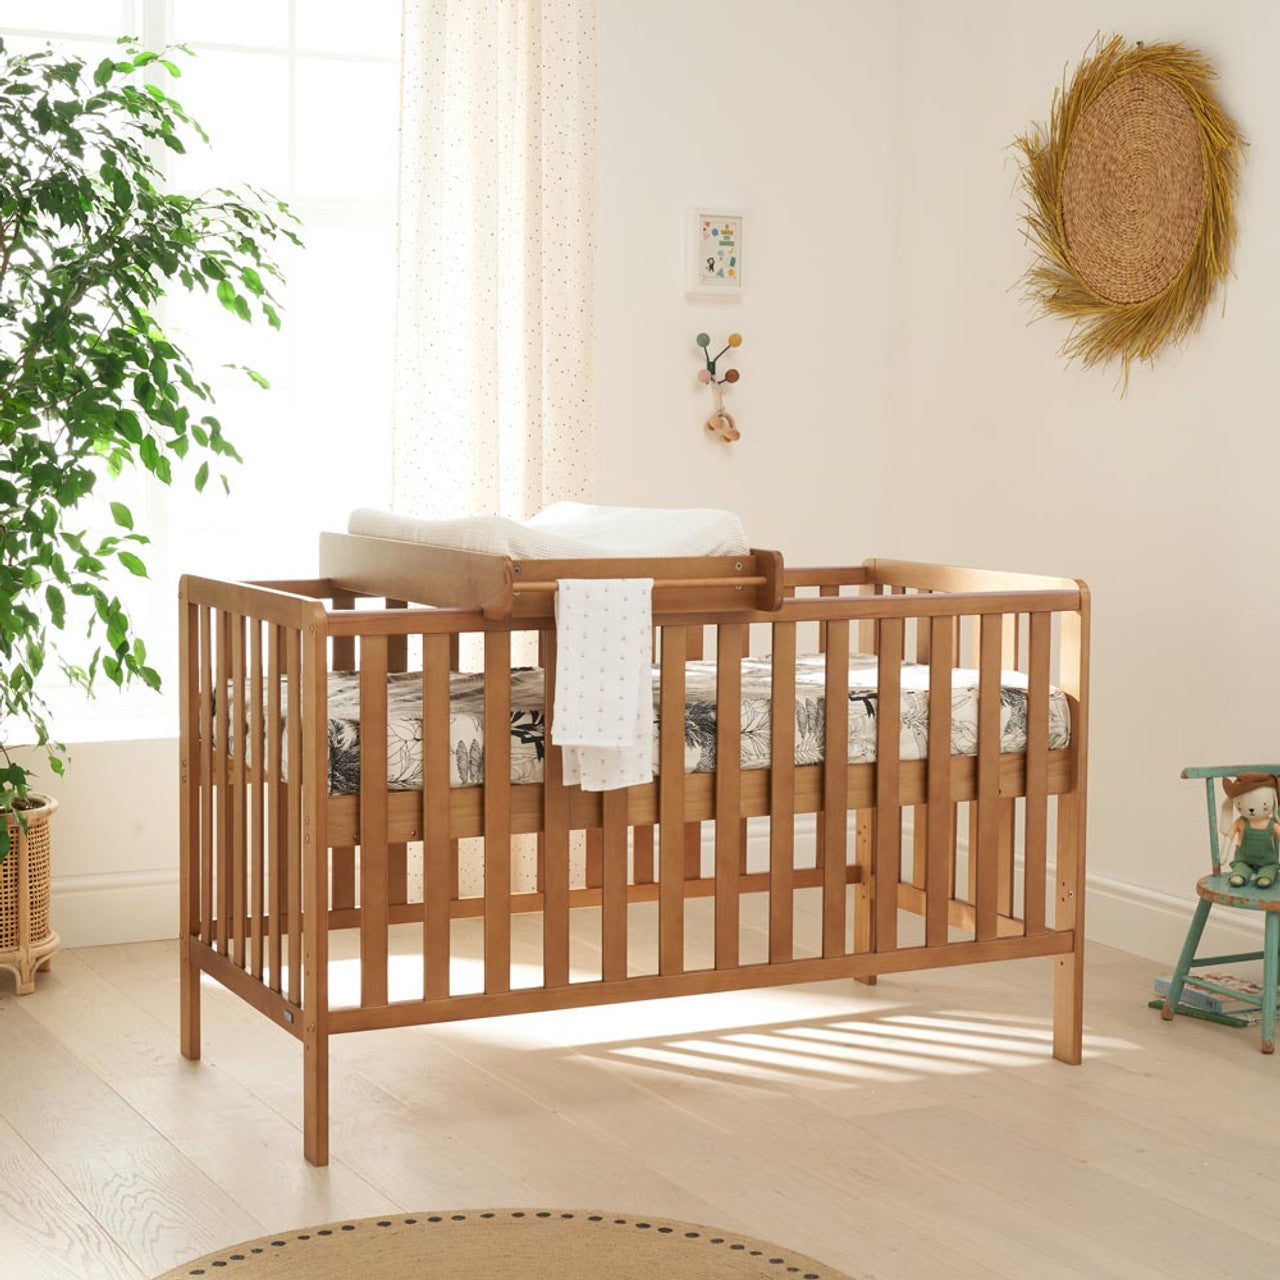 Tutti Bambini Malmo Cot Bed with Rio 2 Piece Room Set - Oak / Dove Grey -  | For Your Little One